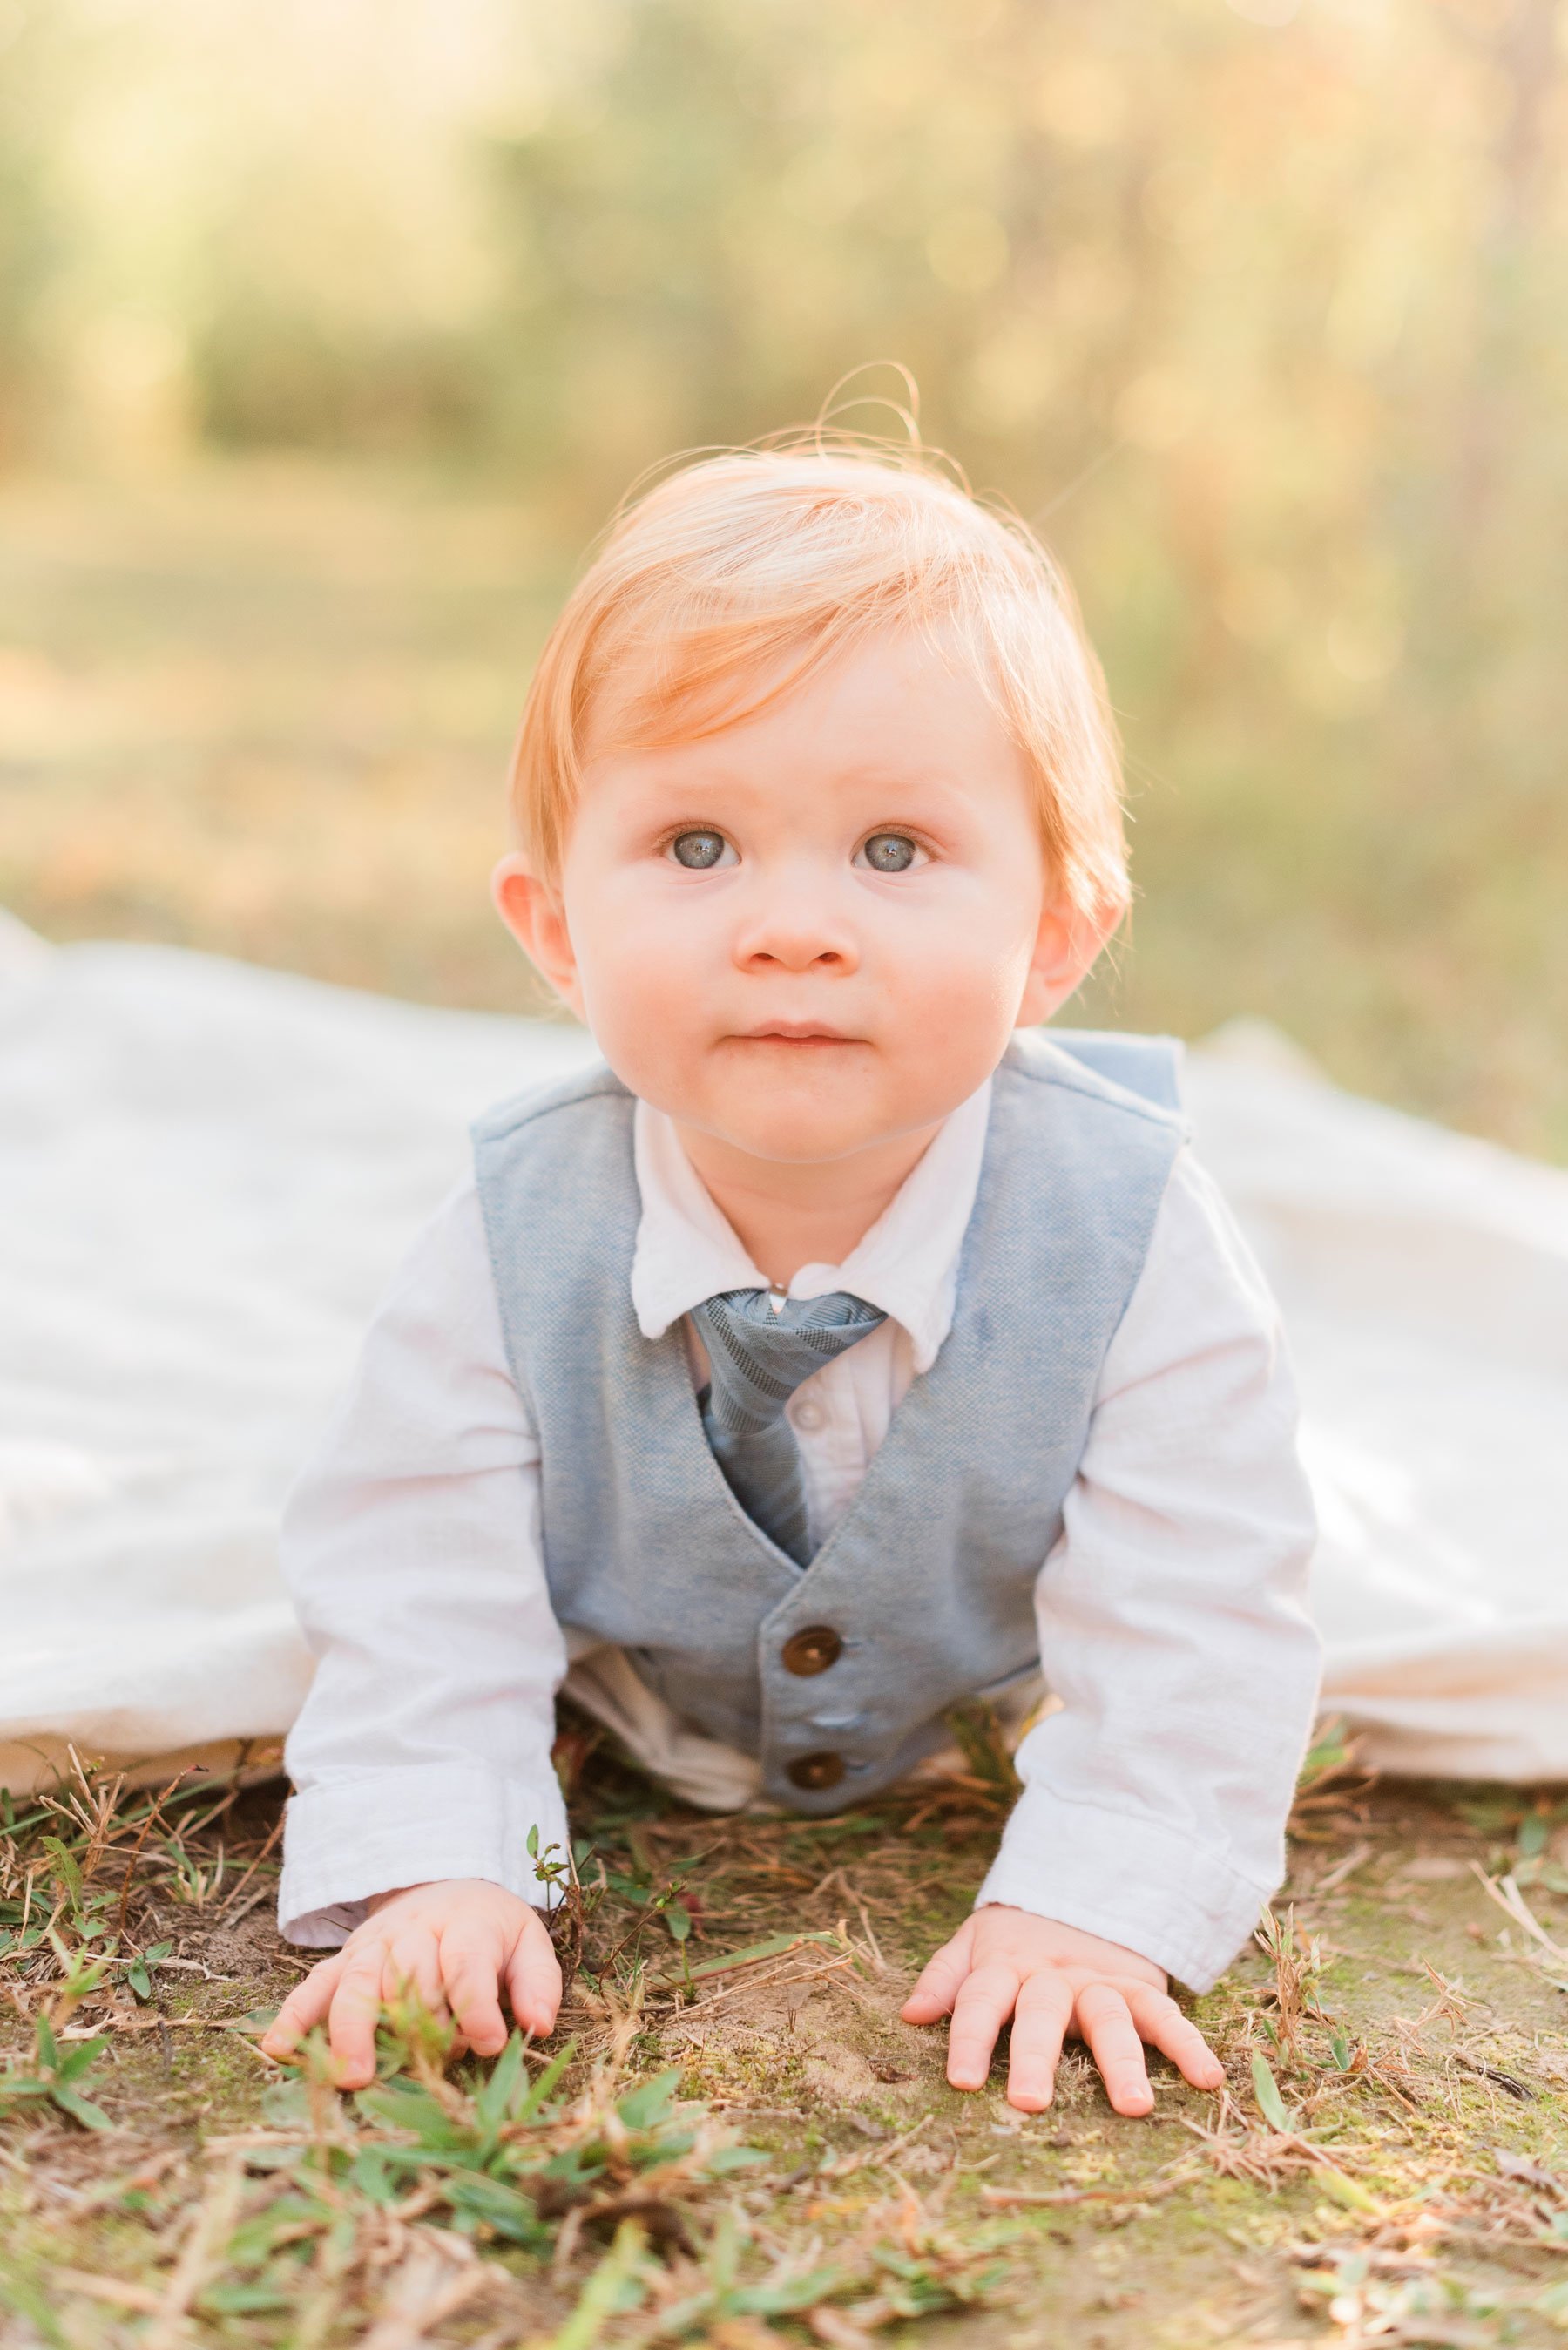  Jacquie Erickson Photography explains how family photos are great for capturing fleeting moments like a child’s first tooth or the way they crinkle their nose when they laugh.  #JacquieEricksonPhotography #ReasonsToTakeFamilyPhotos #AtlantaFamilyPho